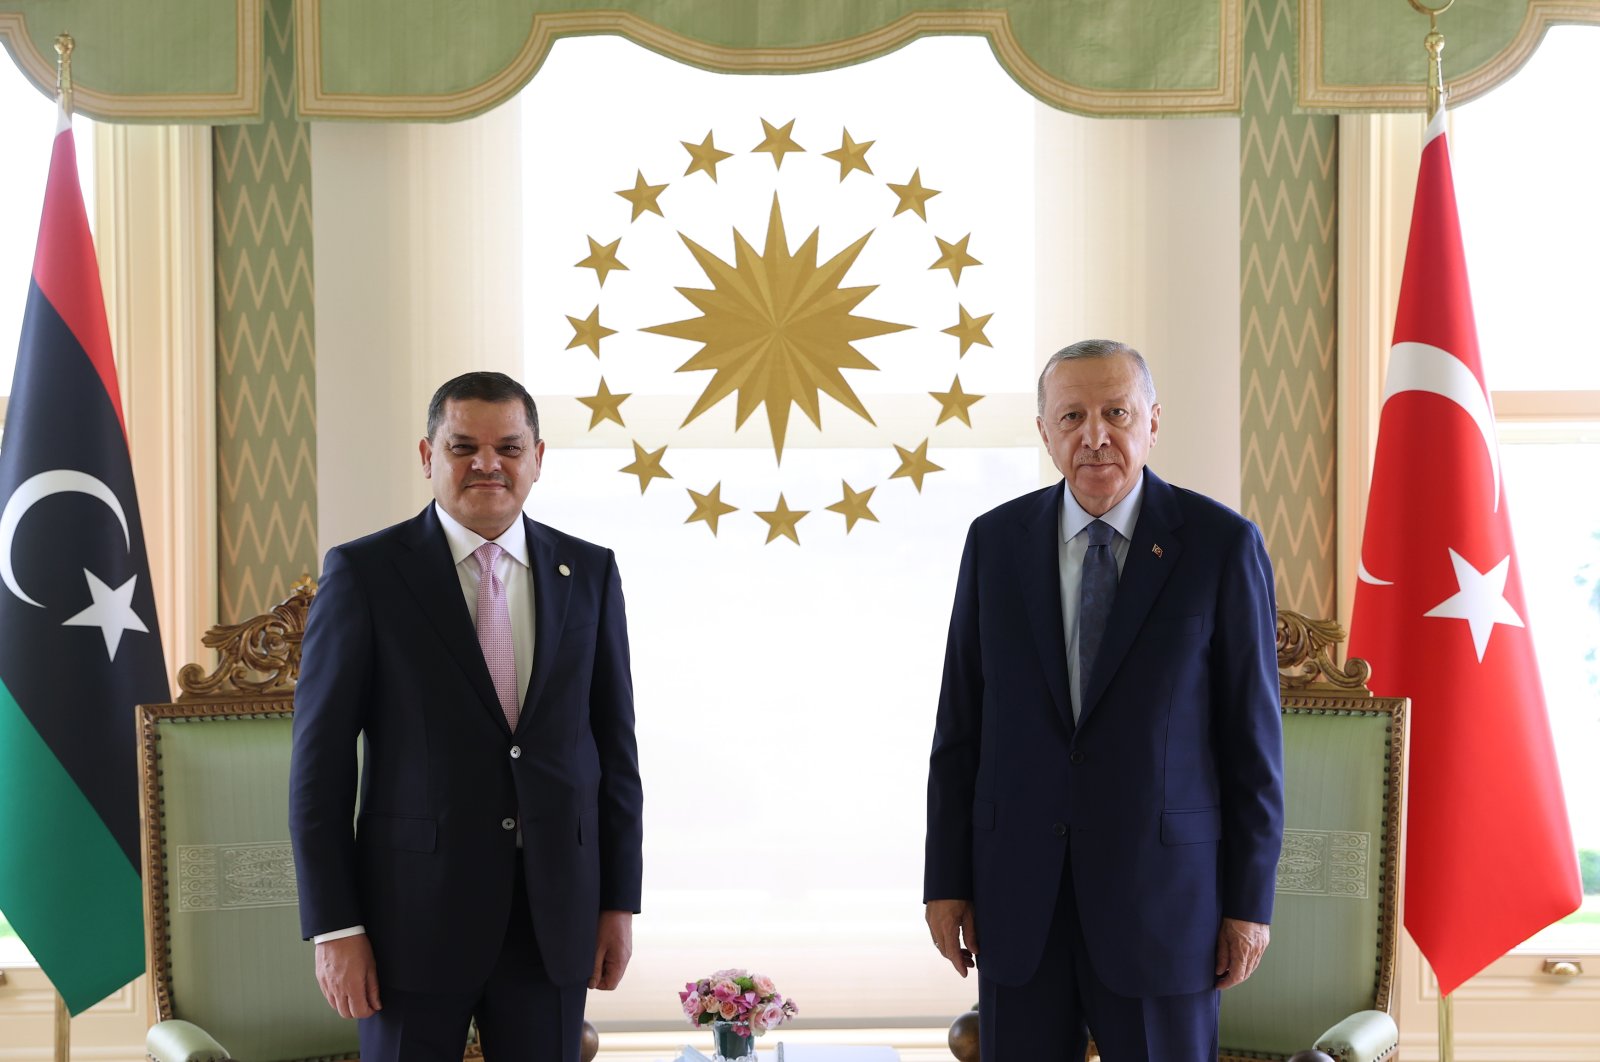 Turkish President Recep Tayyip Erdoğan (R) poses for a photo with the Libyan Prime Minister Abdul Hamid Dbeibah in Istanbul, Aug. 7, 2021. (AA Photo)